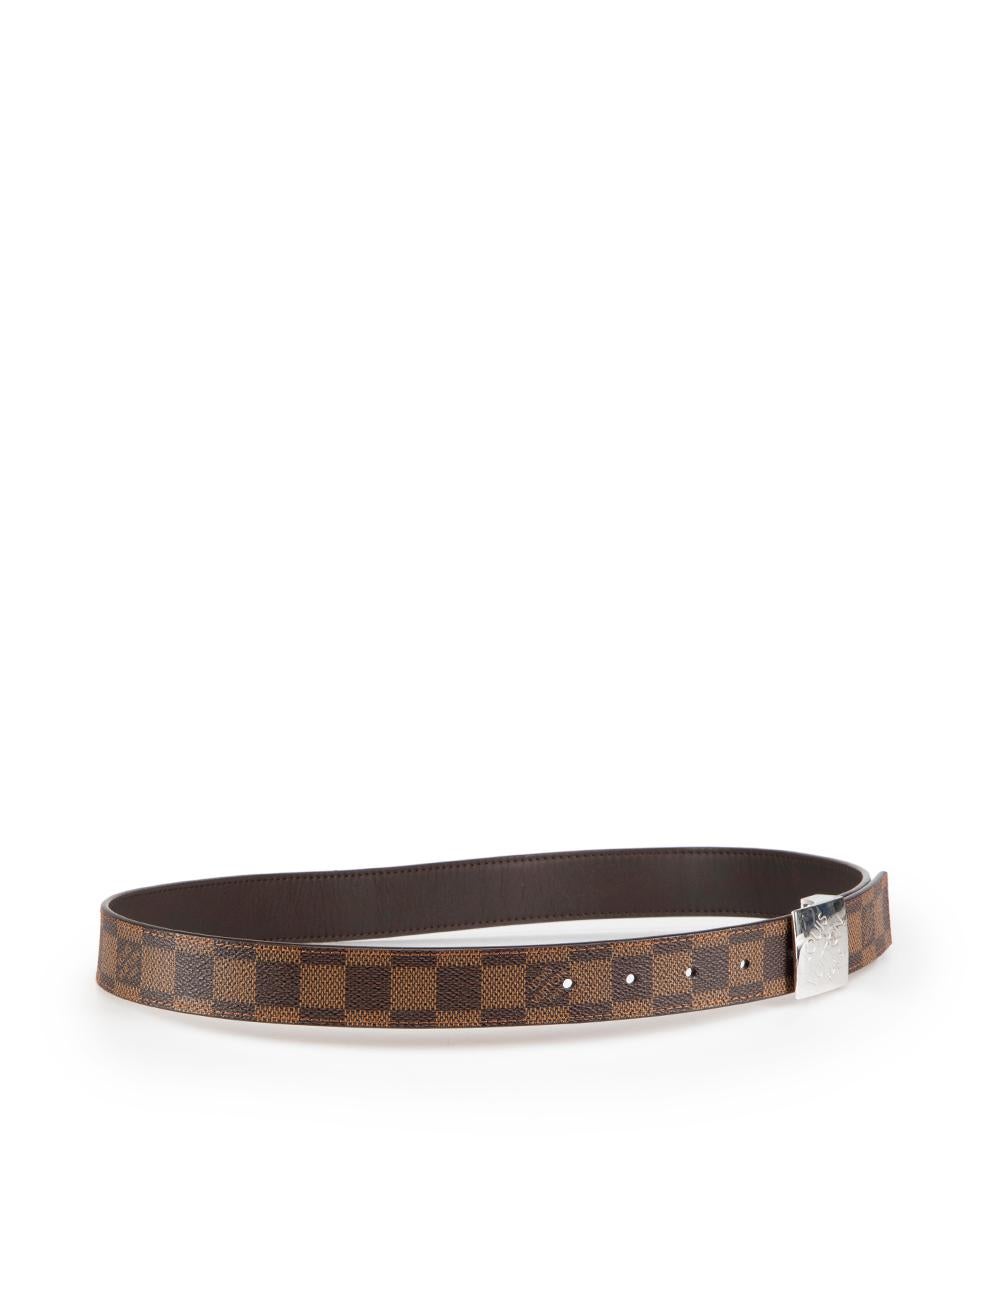 CONDITION is Good. Minor wear to belt is evident. Light wear to buckle fastening with some abrasion, scratches and tarnishing to the metal surface on this used Louis Vuitton designer resale item.
 
 Details
 Brown
 Coated canvas
 Belt
 Logo pattern
